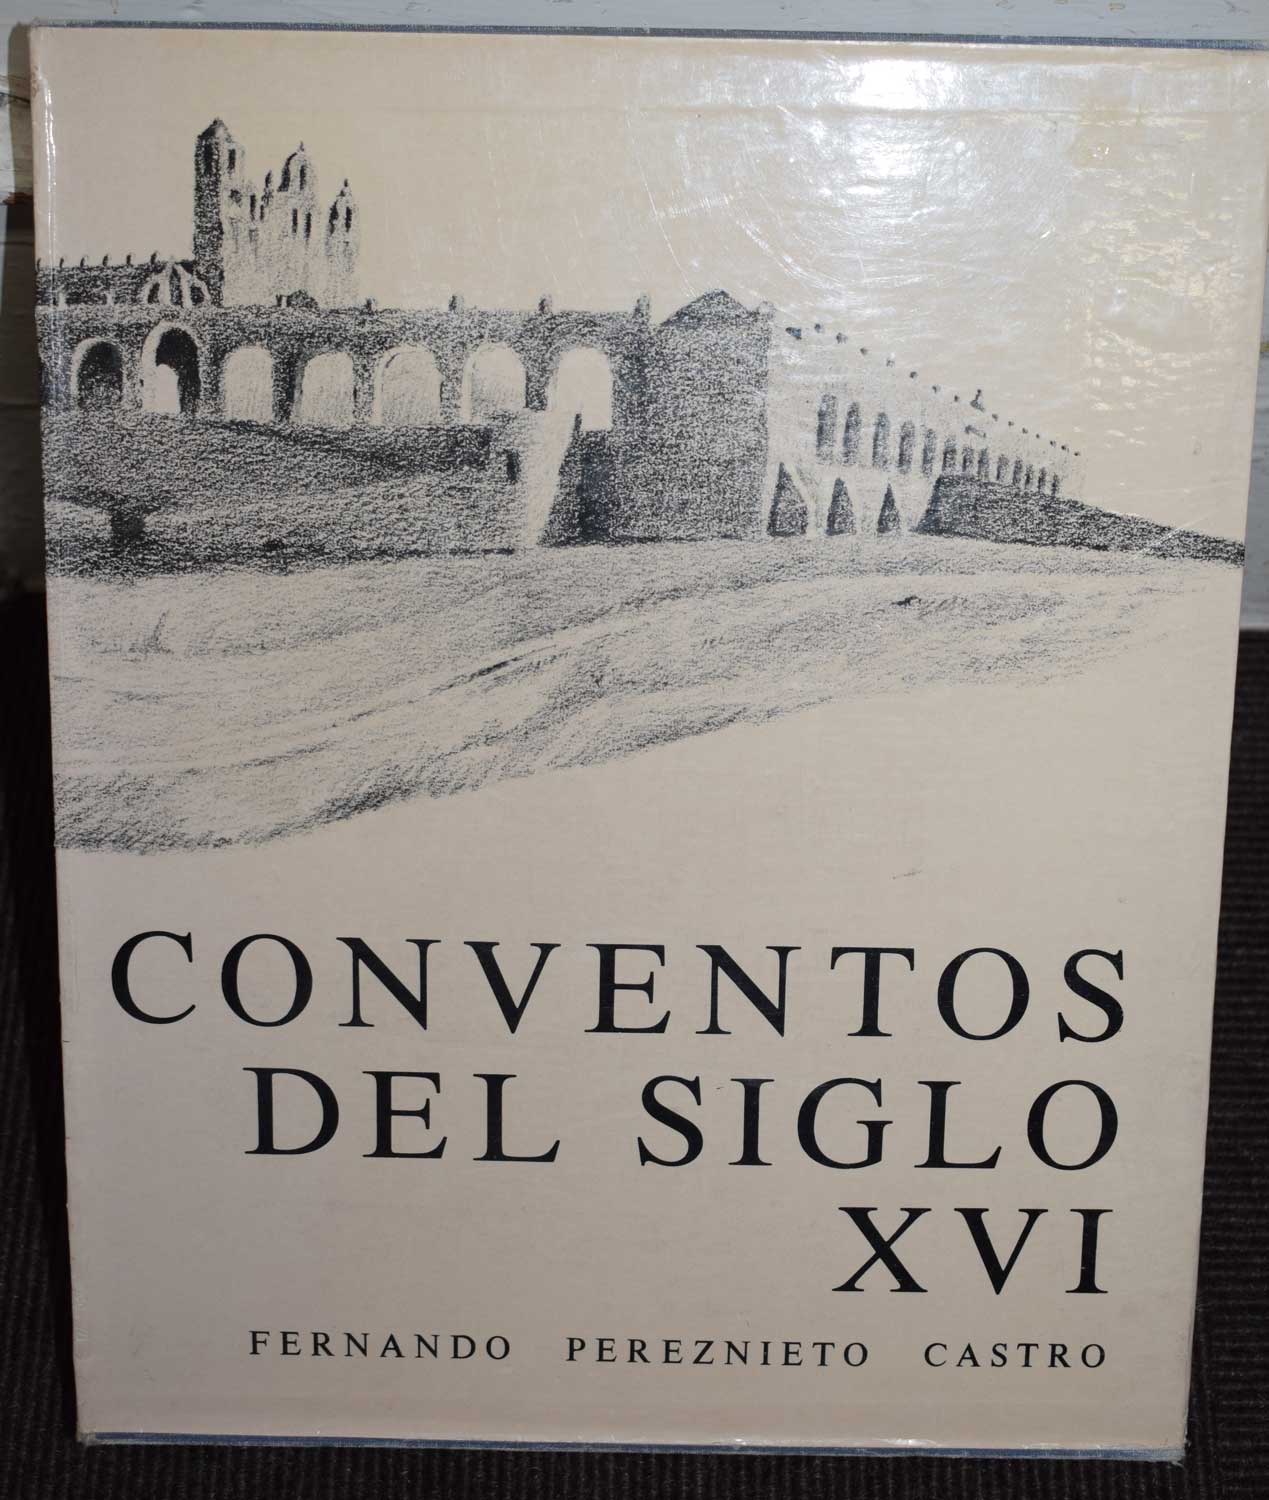 Conventos del Siglo XVI. [Convents of the 16th Century] Two volume set. Signed copy.